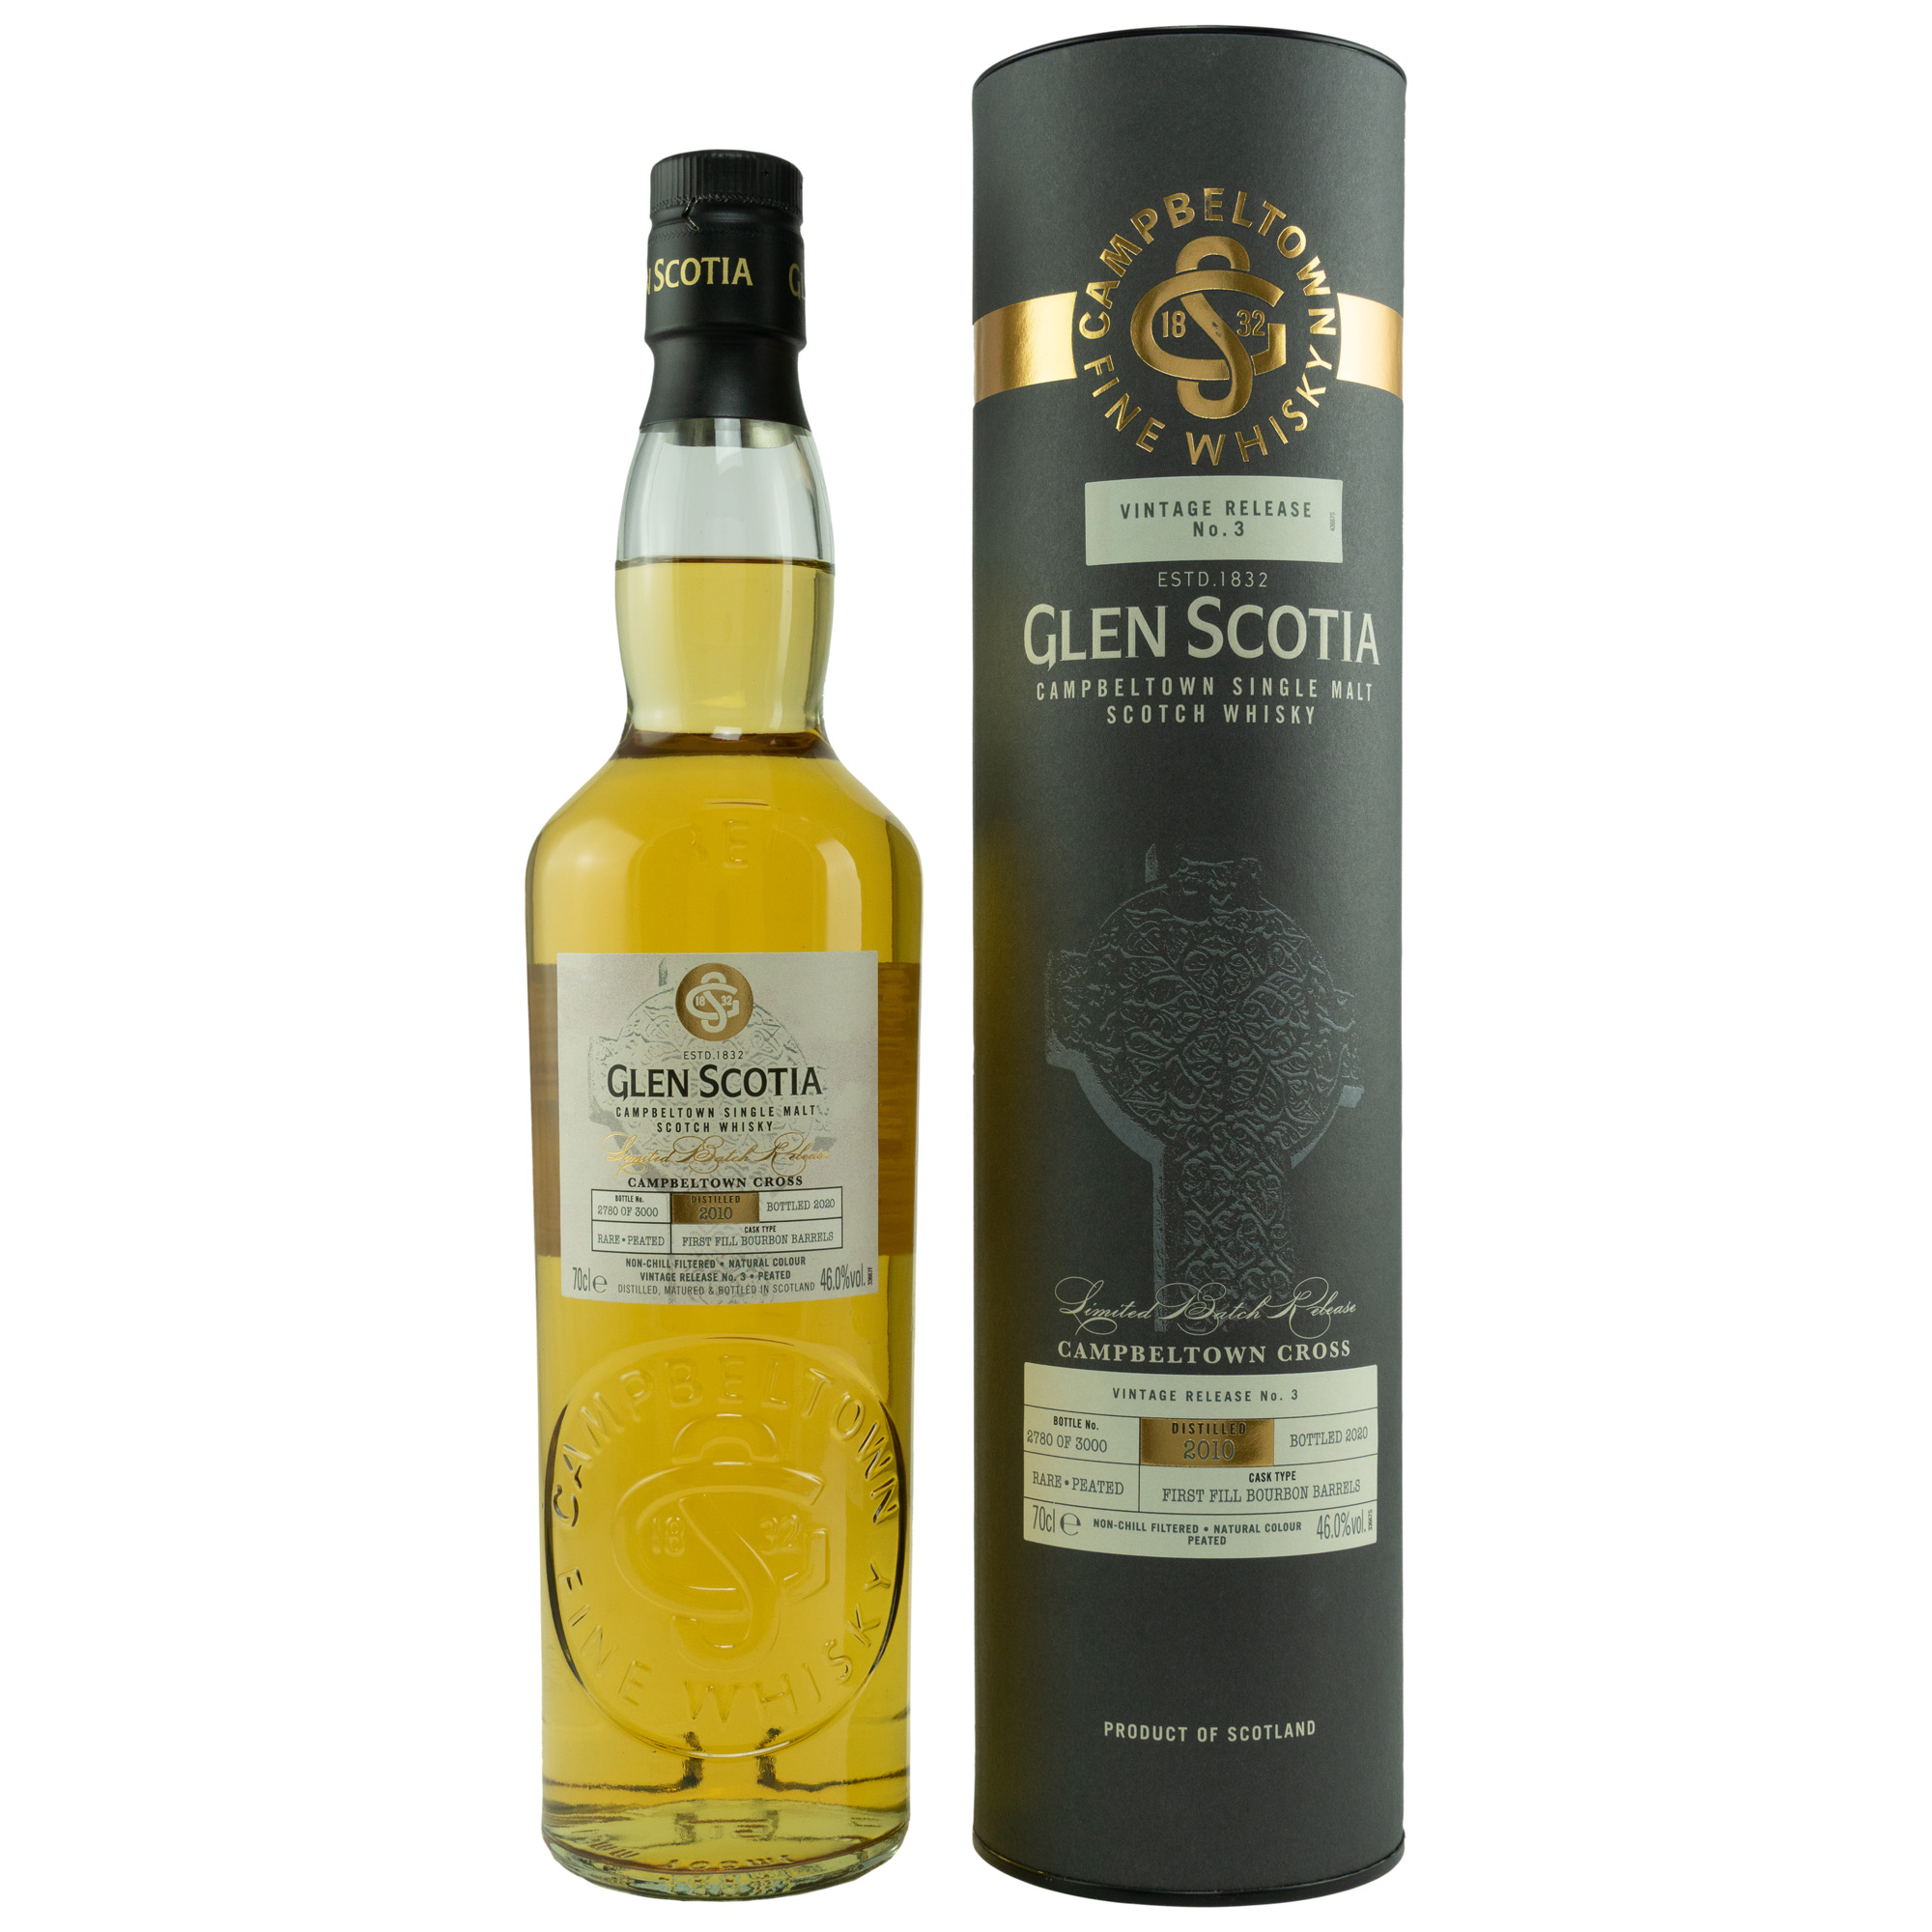 Glen Scotia 2010 Campbeltown Cross, Vintage Release No. 3, Rare Peated 